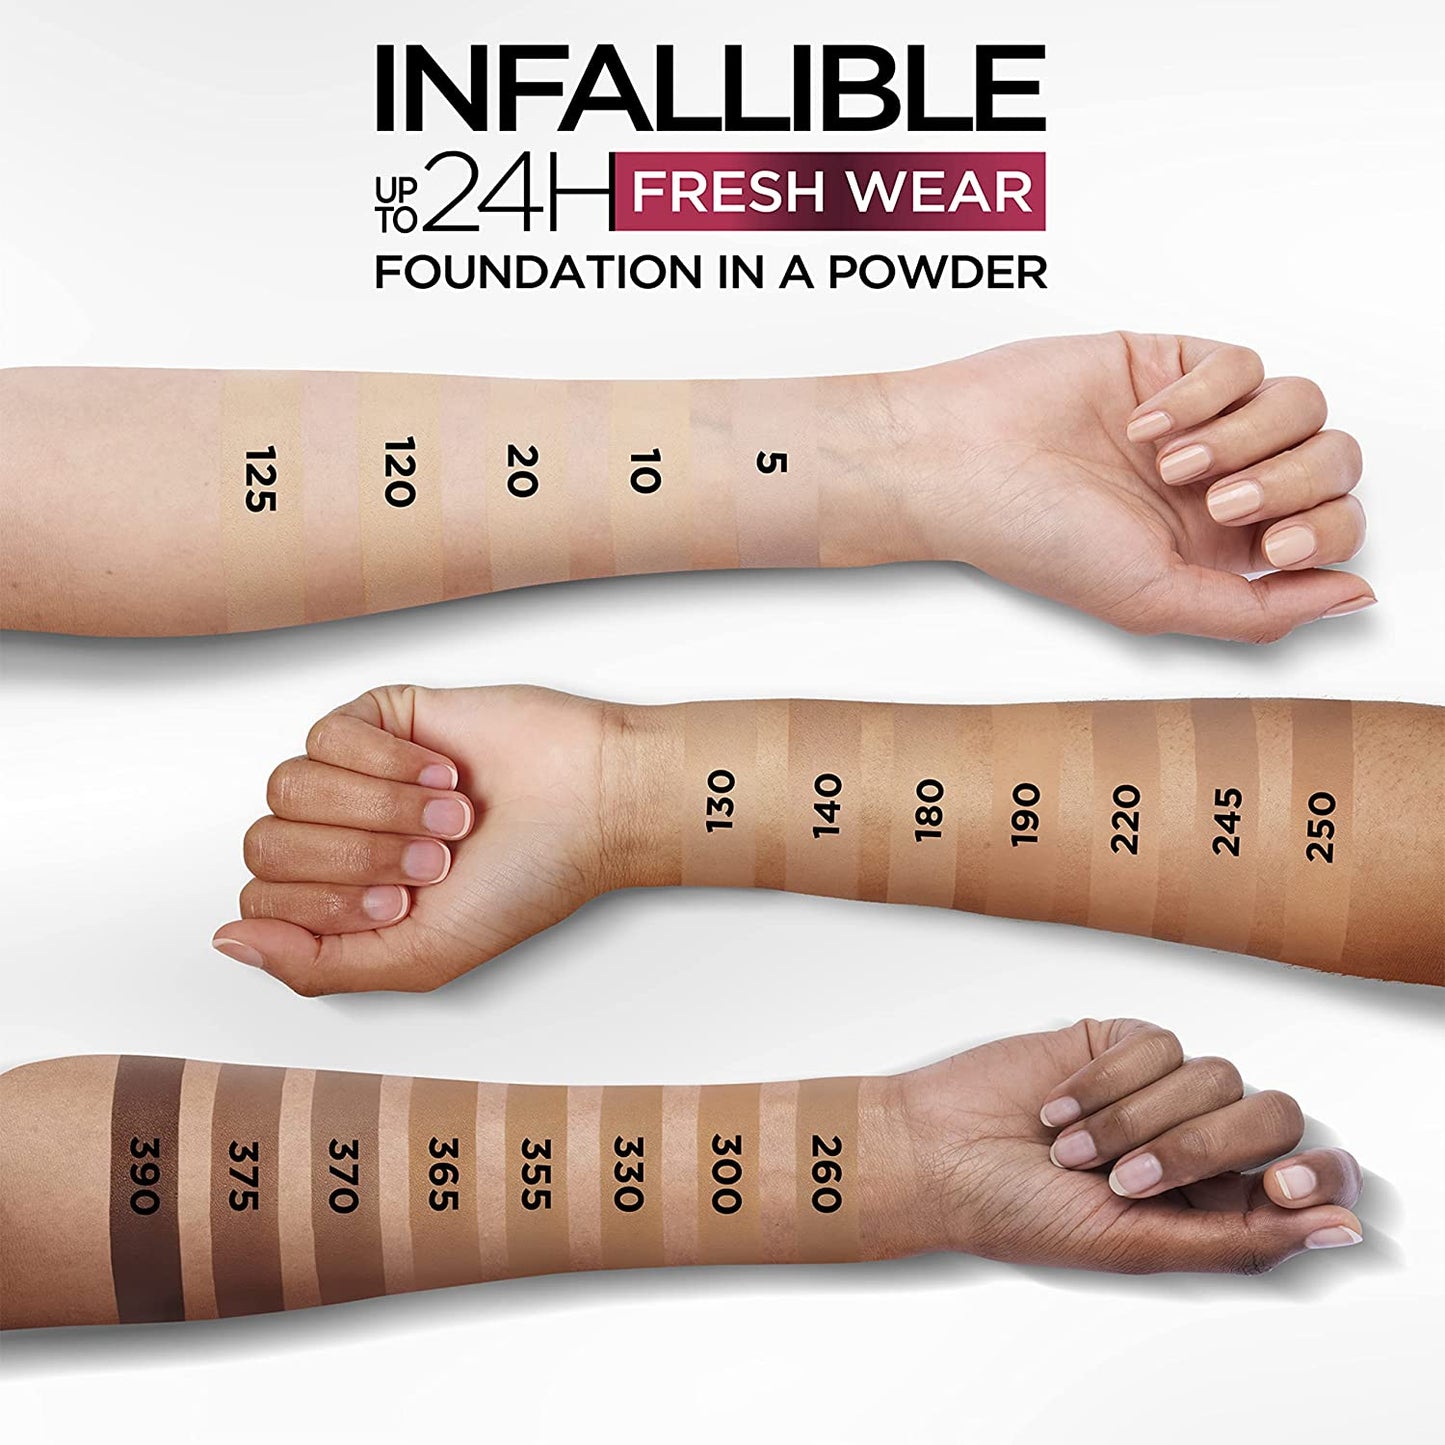 Infallible Foundation in a powder L’Oreal